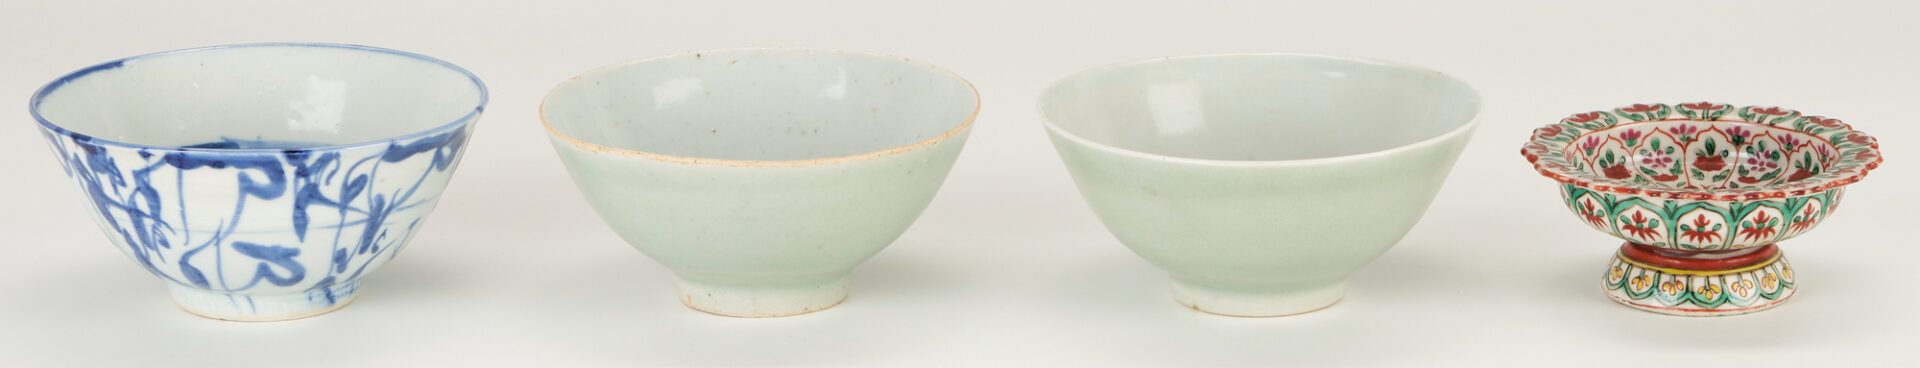 Lot 961: 6 Asian Porcelain Items, incl. Double Gourd Vases and Chinese Export